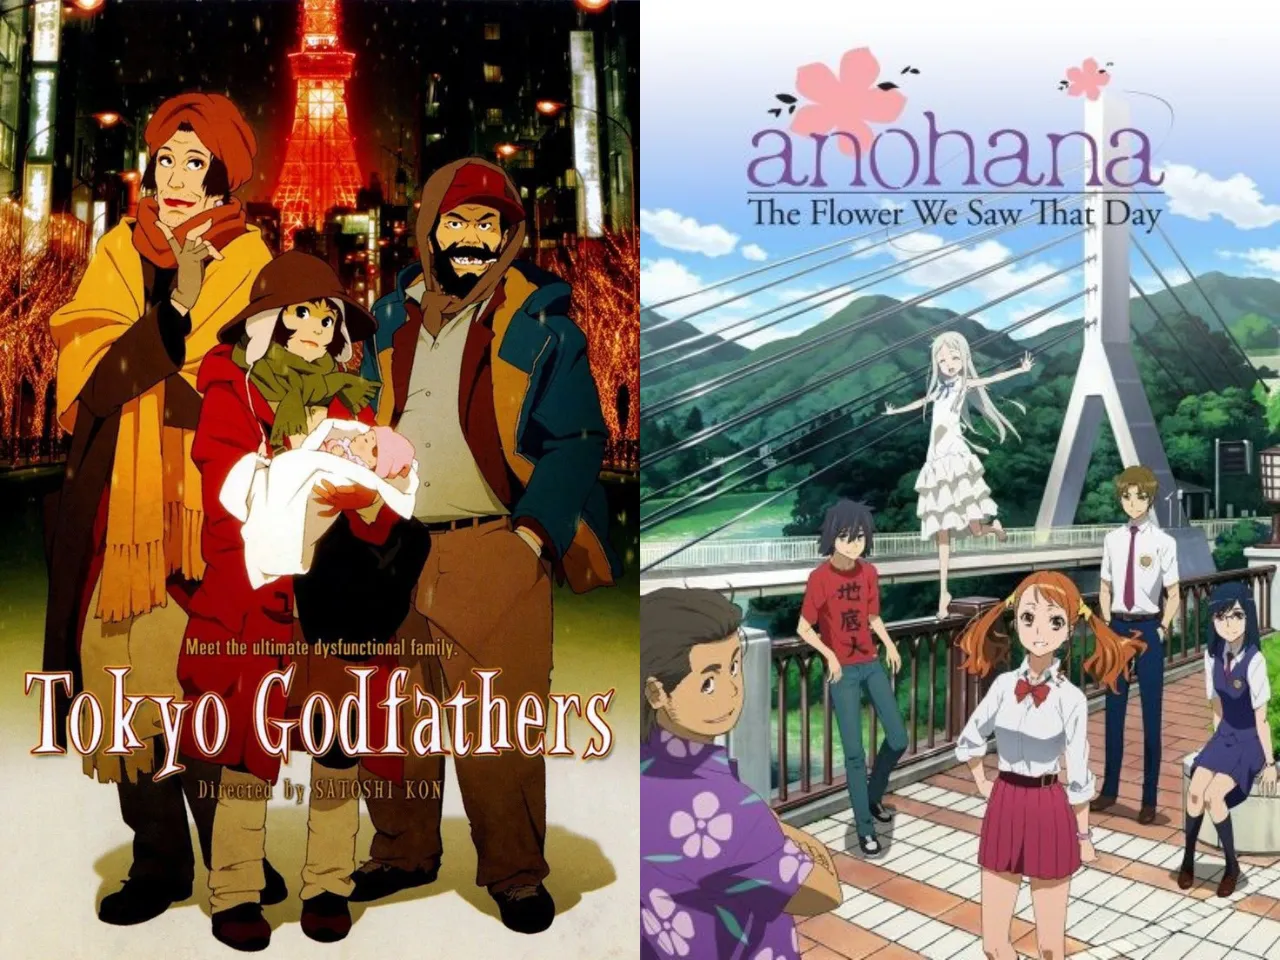 9 anime movies and shows to watch on NYE!